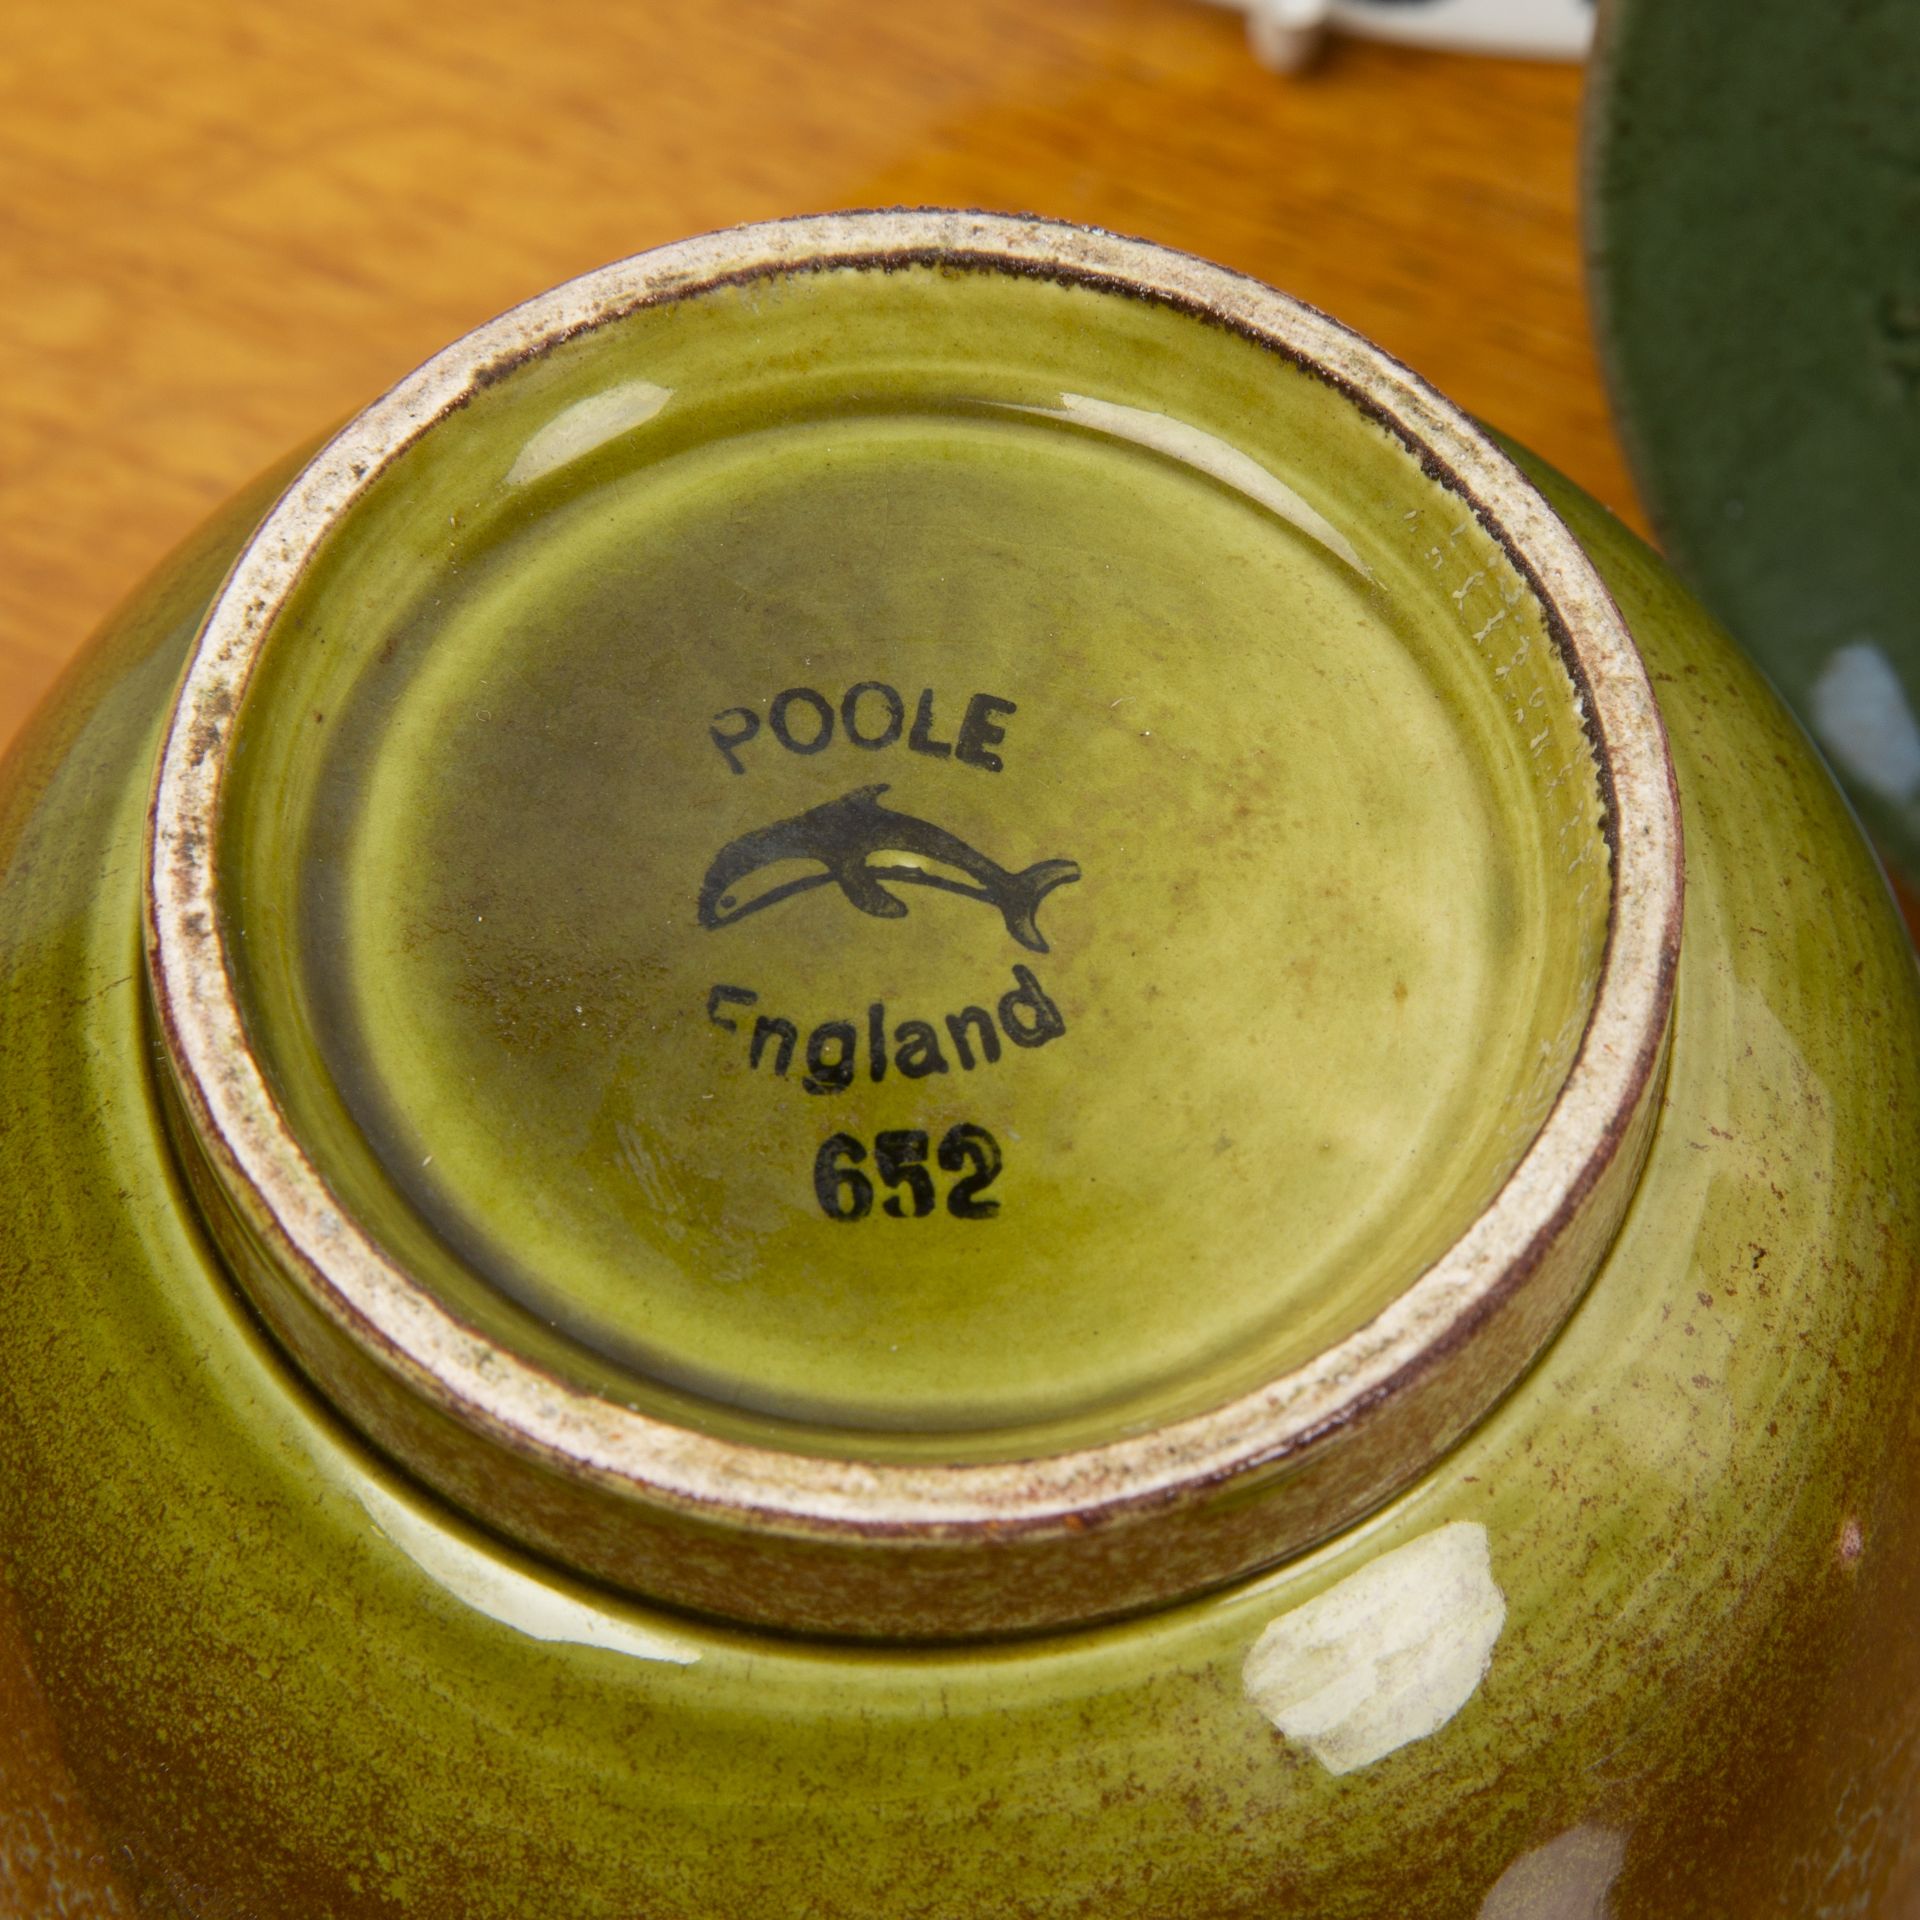 Collection of various Poole Pottery to include RNLI Conference dish, transfer printed, printed marks - Image 5 of 7